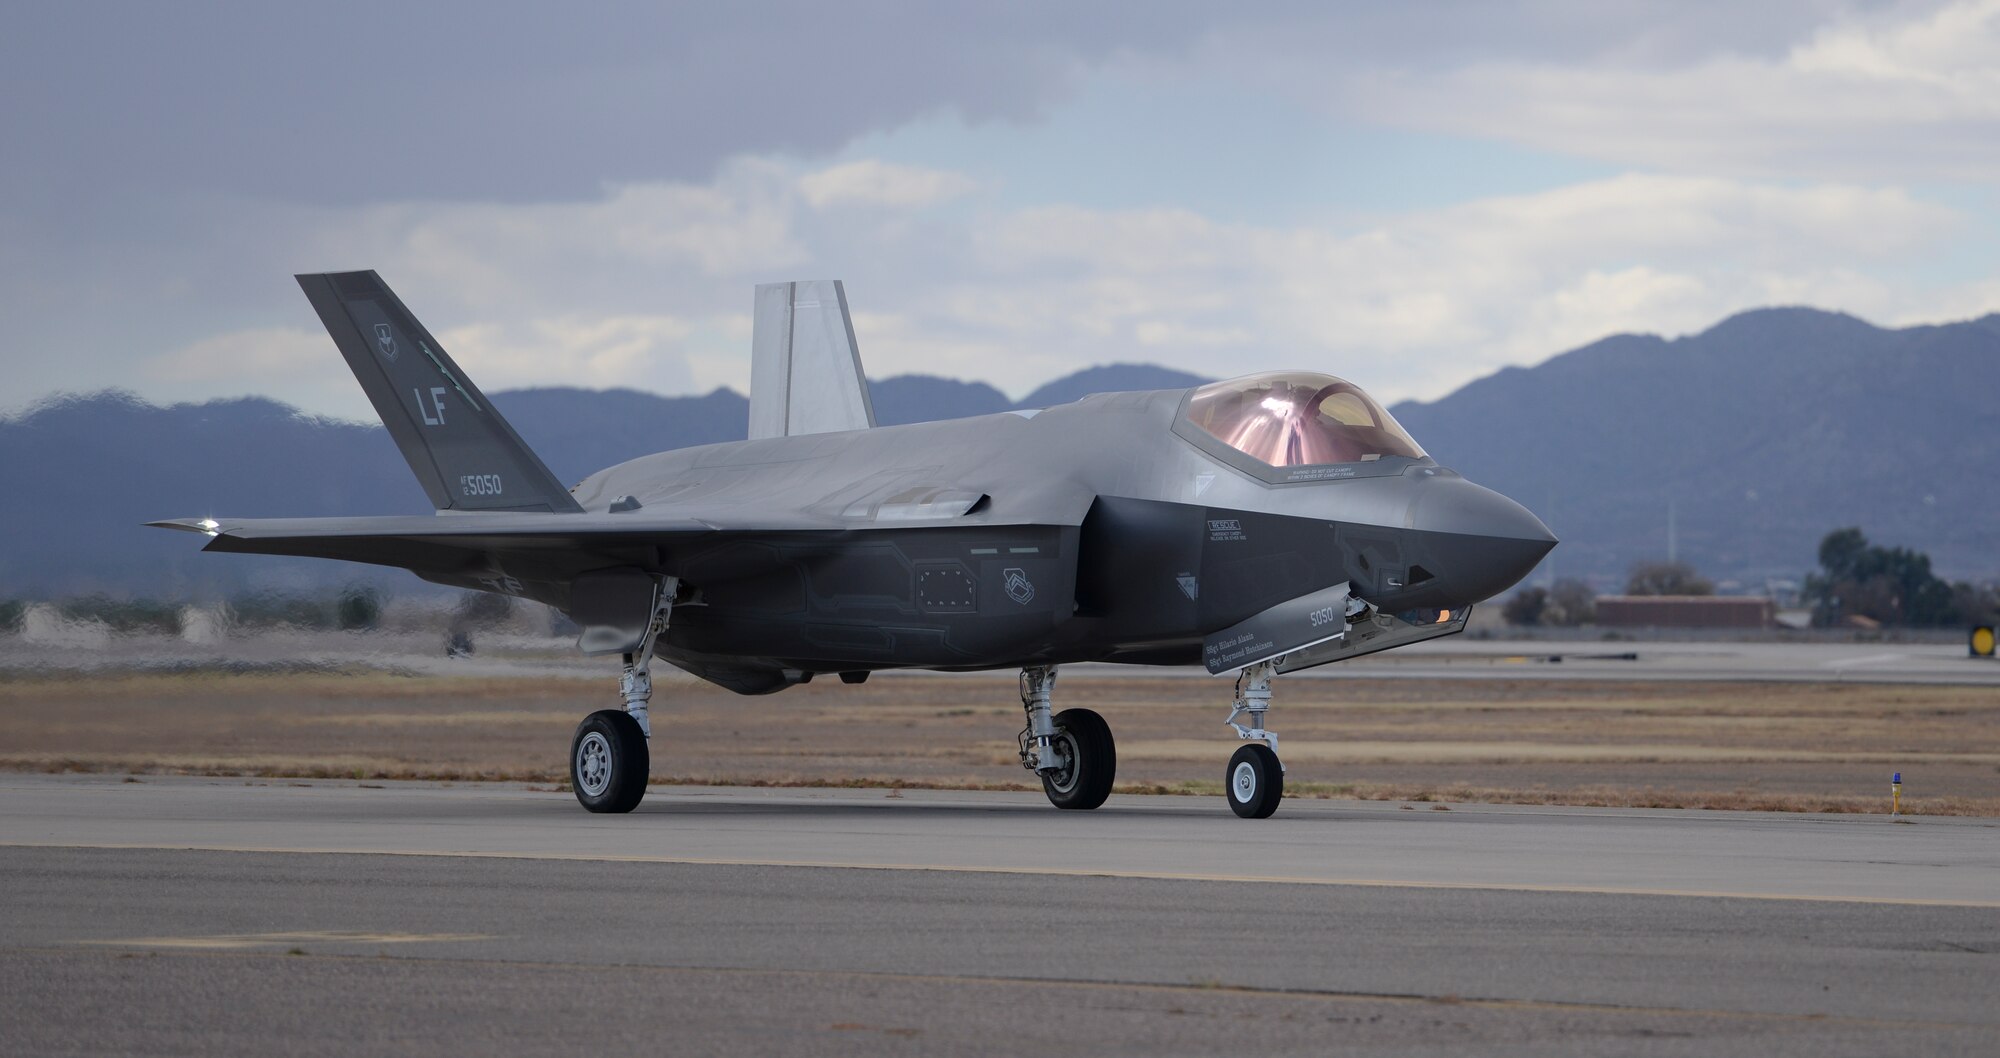 An F-35 taxis from the runway onto the flightline after successfully completing a sortie, Dec. 14, 2015, at Luke Air Force Base. The F-35 Lightning II is the most advanced fighter aircraft ever fielded, and is being adopted internationally by the United States and eight partner nations including Norway, Italy, and Australia. (U.S. Air Force photo by Airman 1st Class Ridge Shan)